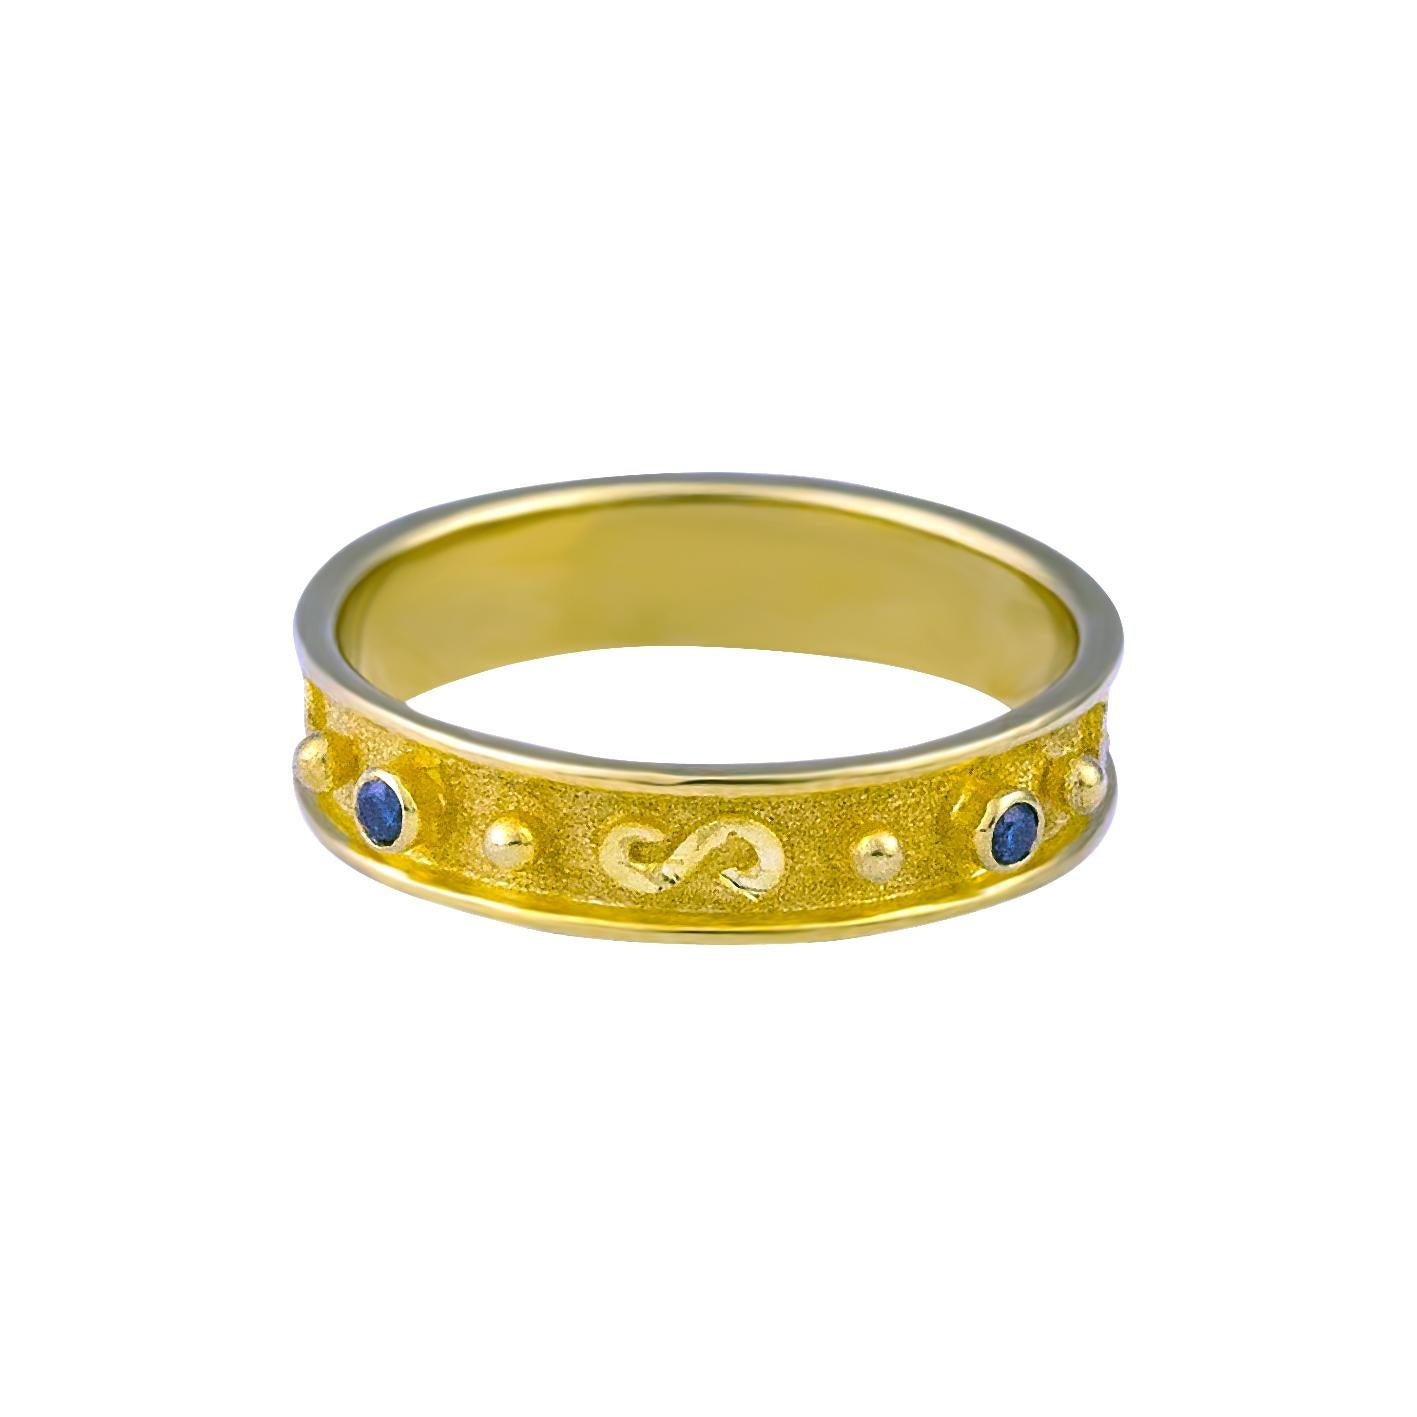 S.Georgios design Ring is handmade from solid 18 Karat Yellow Gold and is microscopically decorated with Granulation work all the way around with white gold beads and wires shaped like the symbol of long life, the Greek Key Design. This beautiful